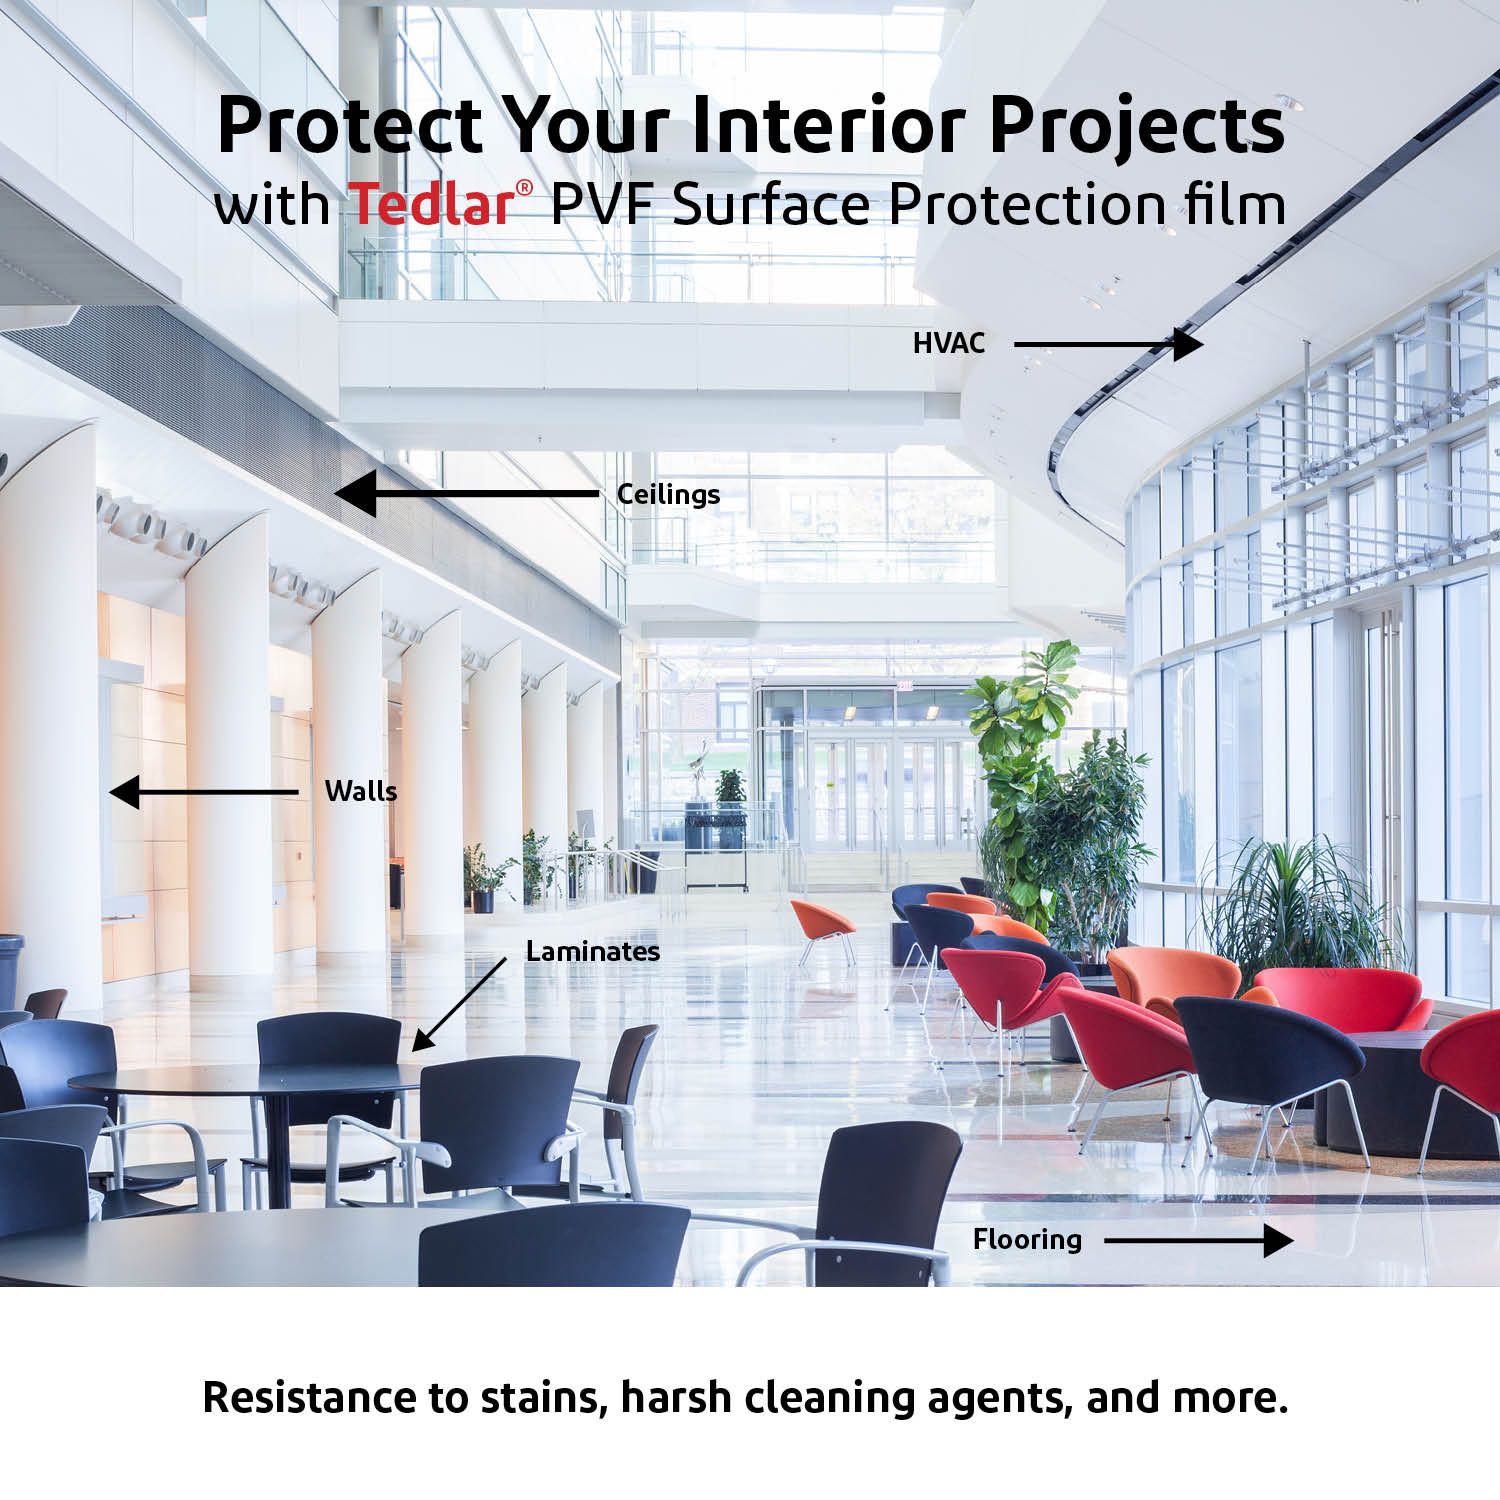 Protect your interior projects